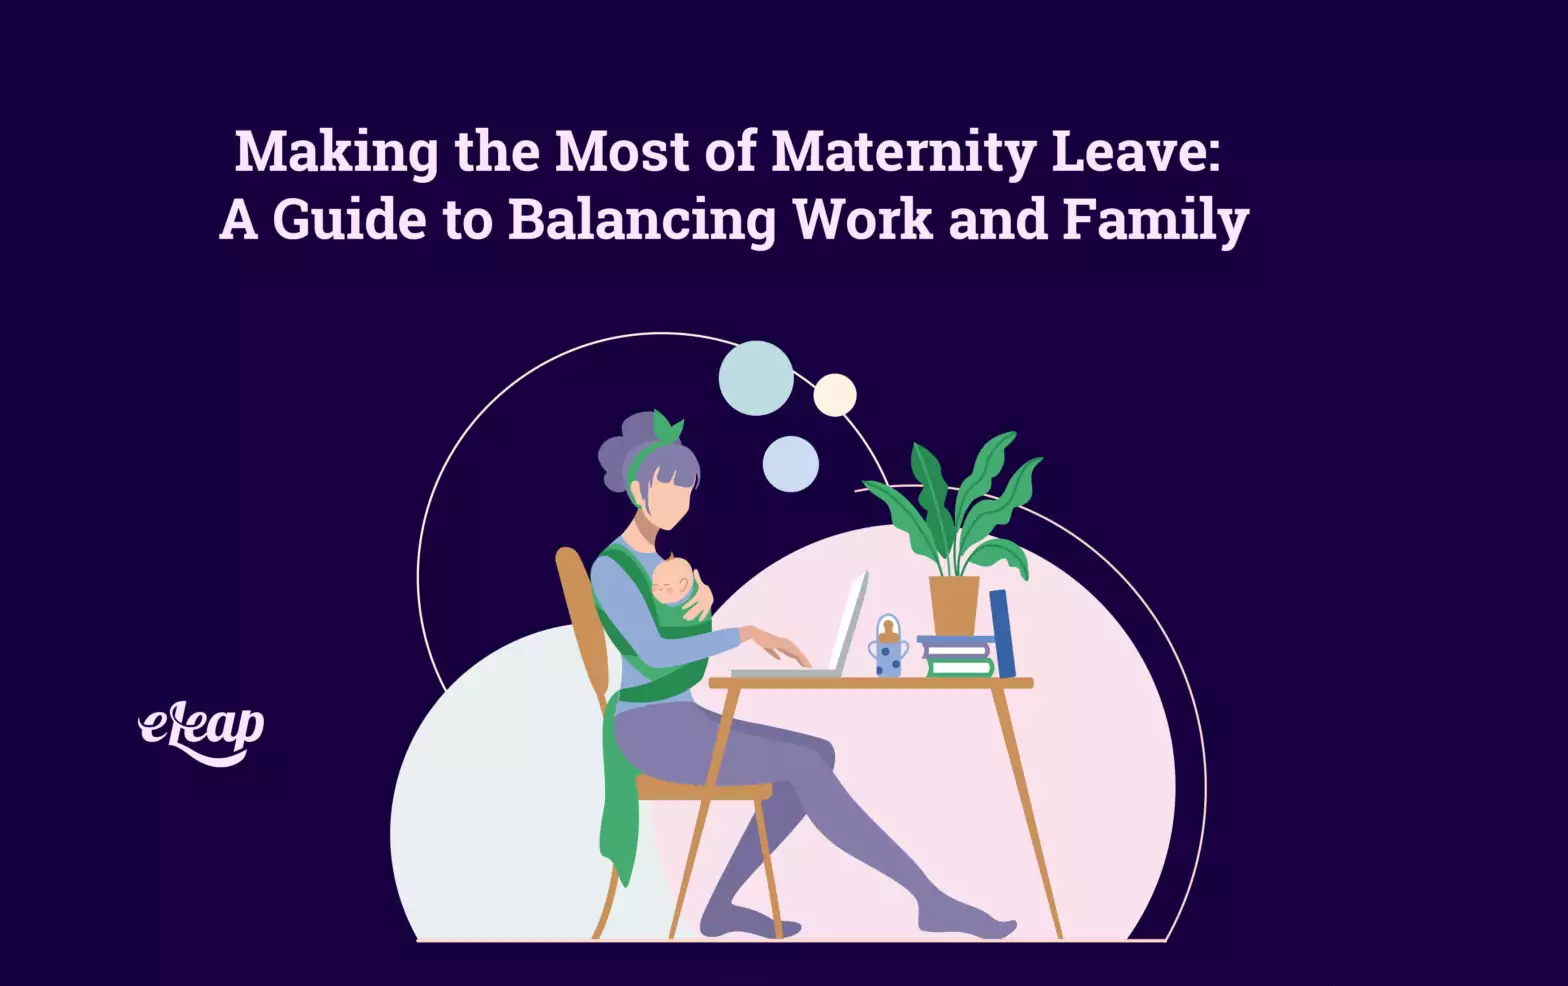 Making the Most of Maternity Leave: A Guide to Balancing Work and Family